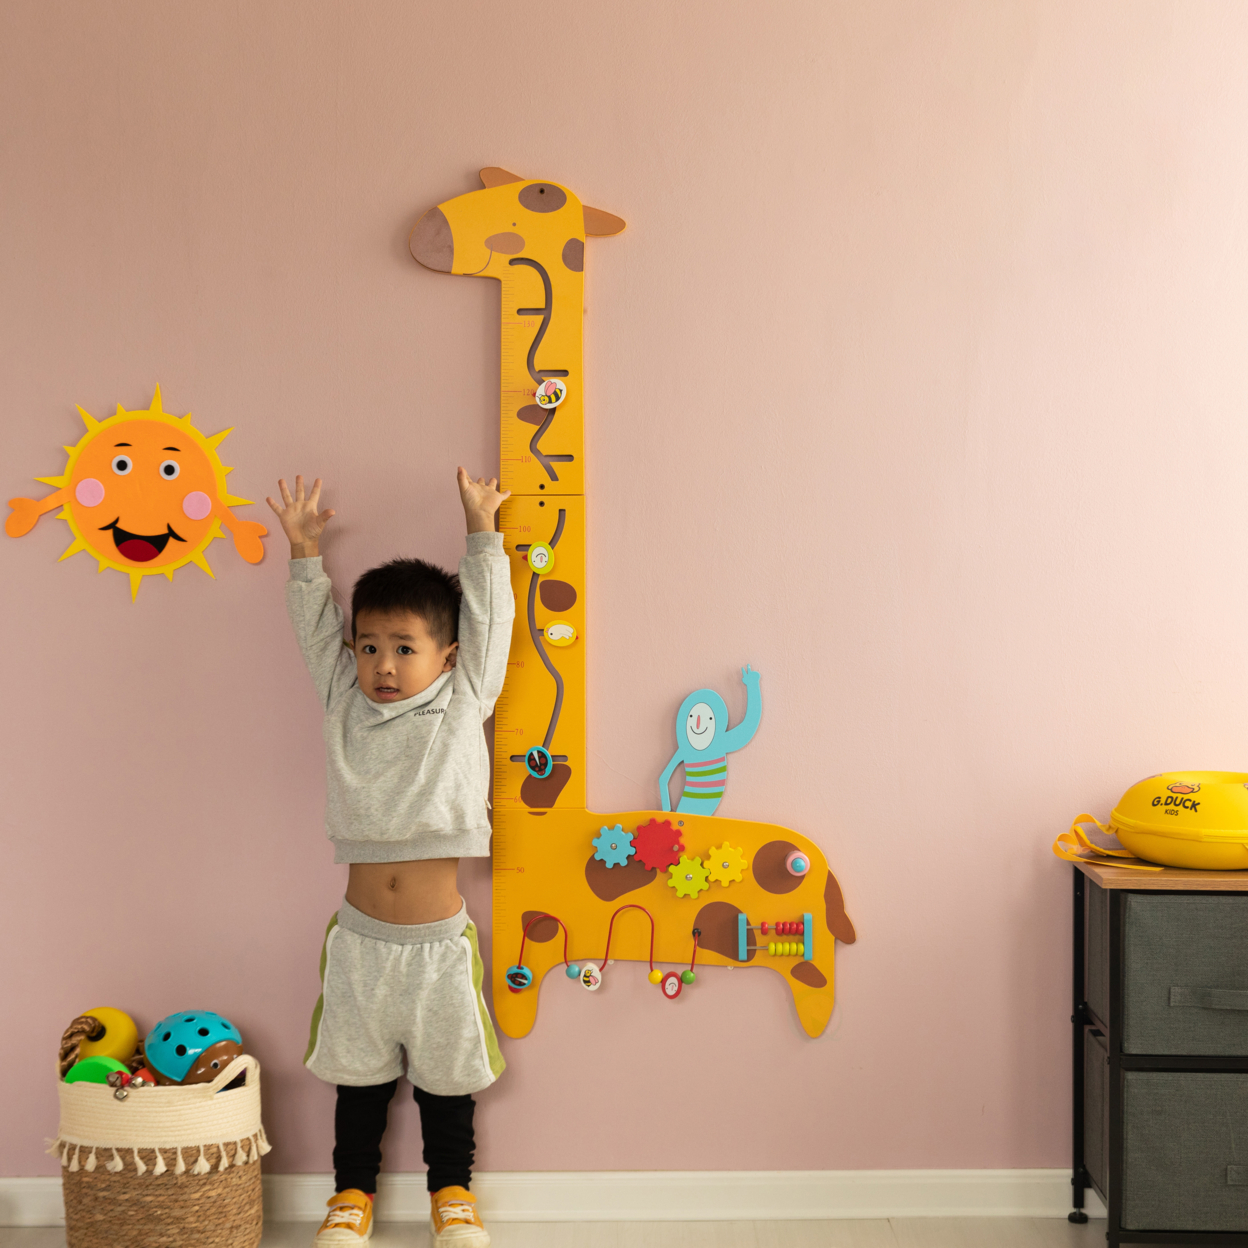 ShpilMaster Wooden Giraffe Sensory Wall Game, Activity Toy Growth Chart for Playroom, Nursery, Preschool, and Doctors' Office